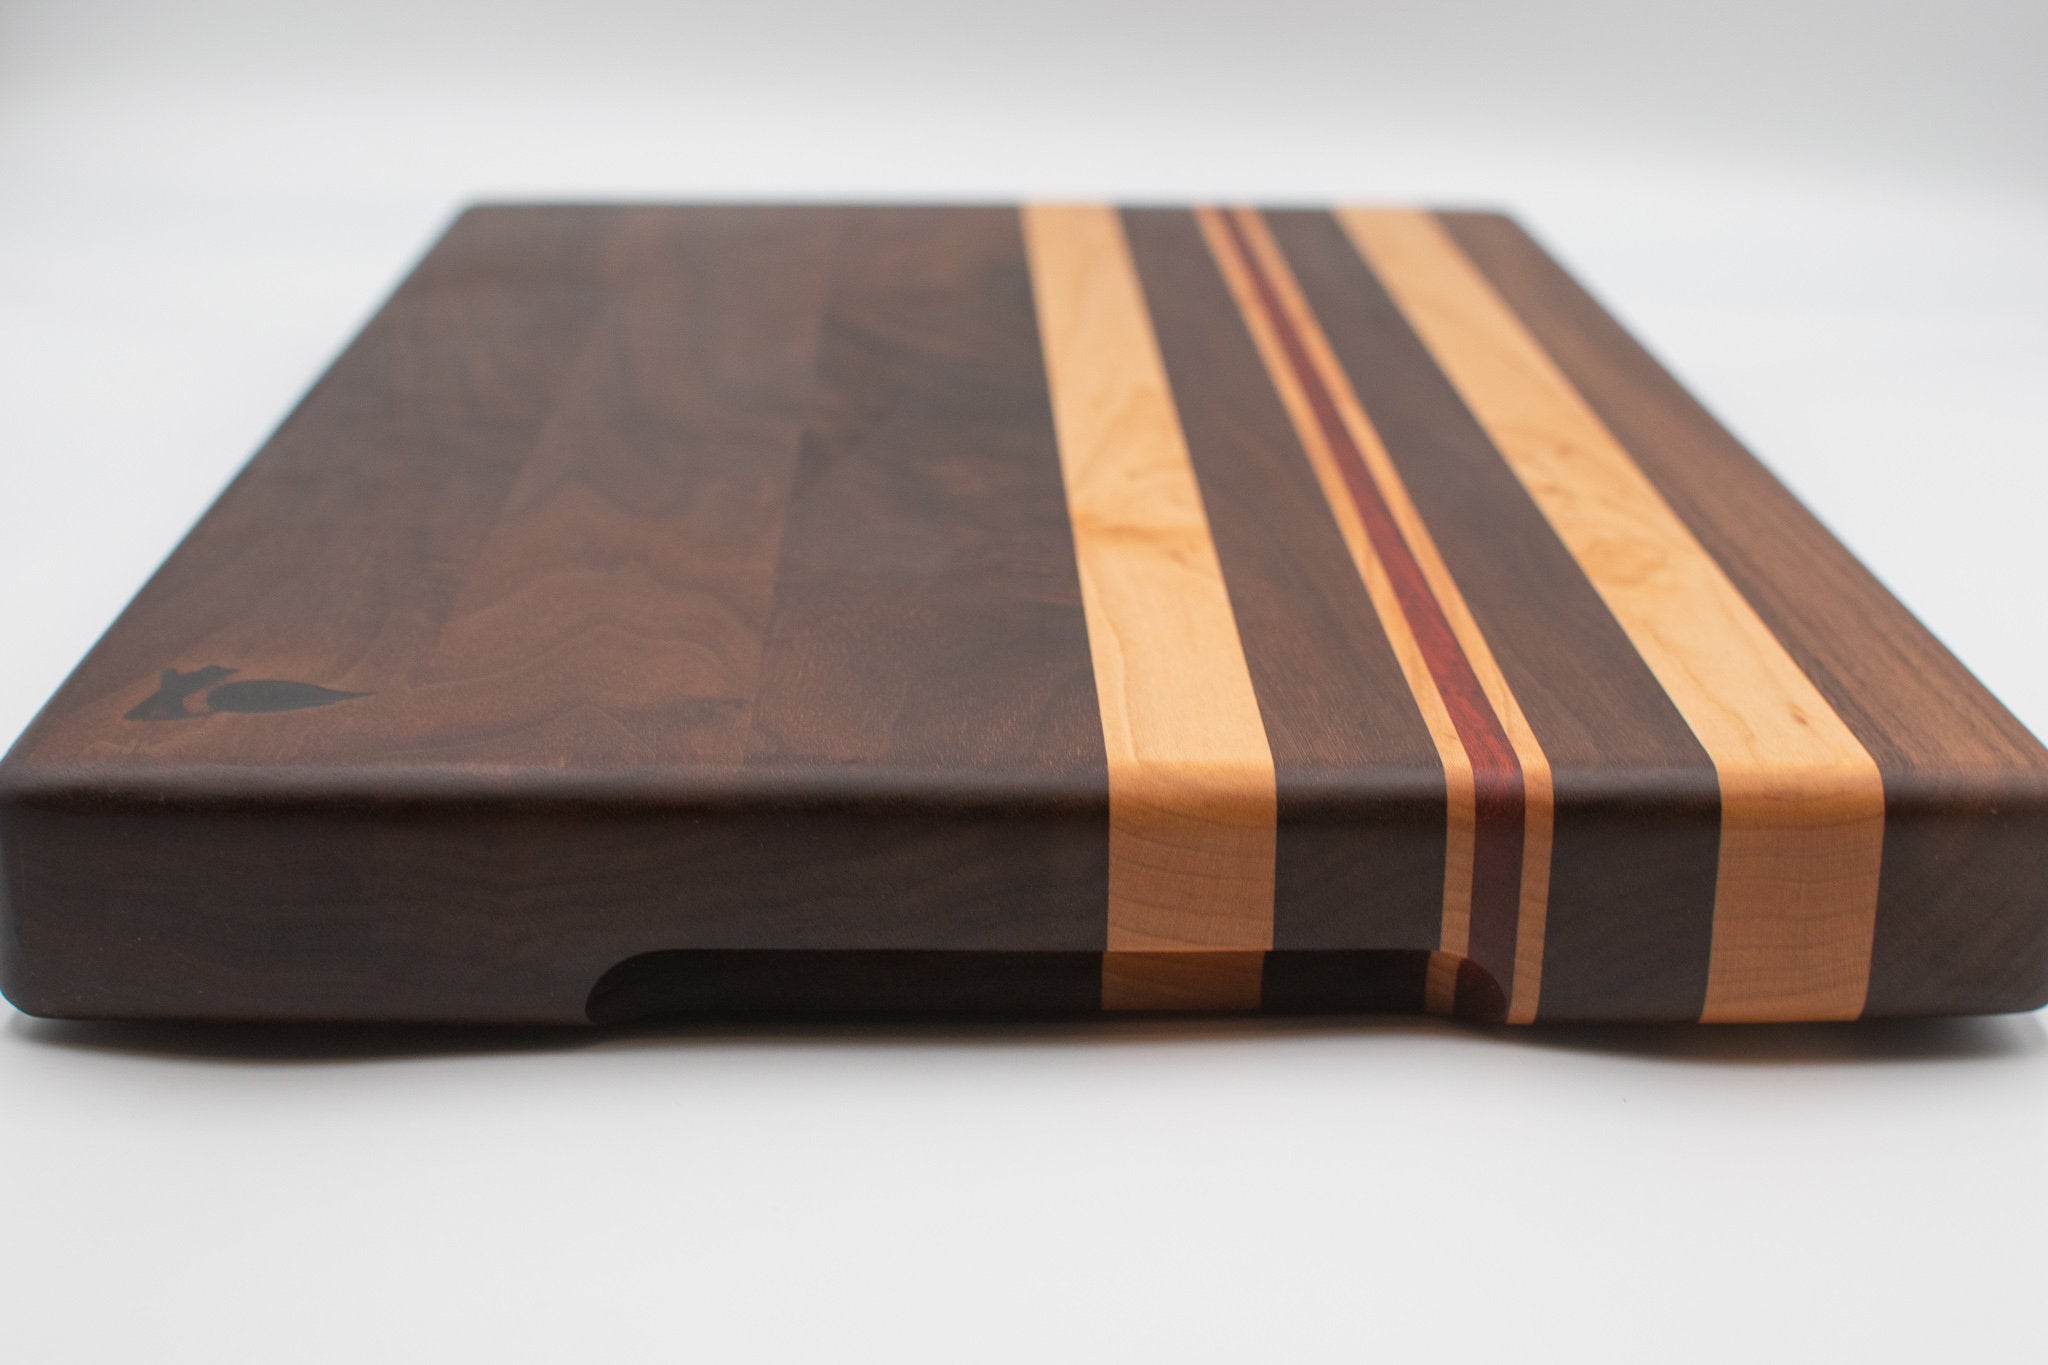 Custom Maple Pull Out Cutting Board - Natural Grain